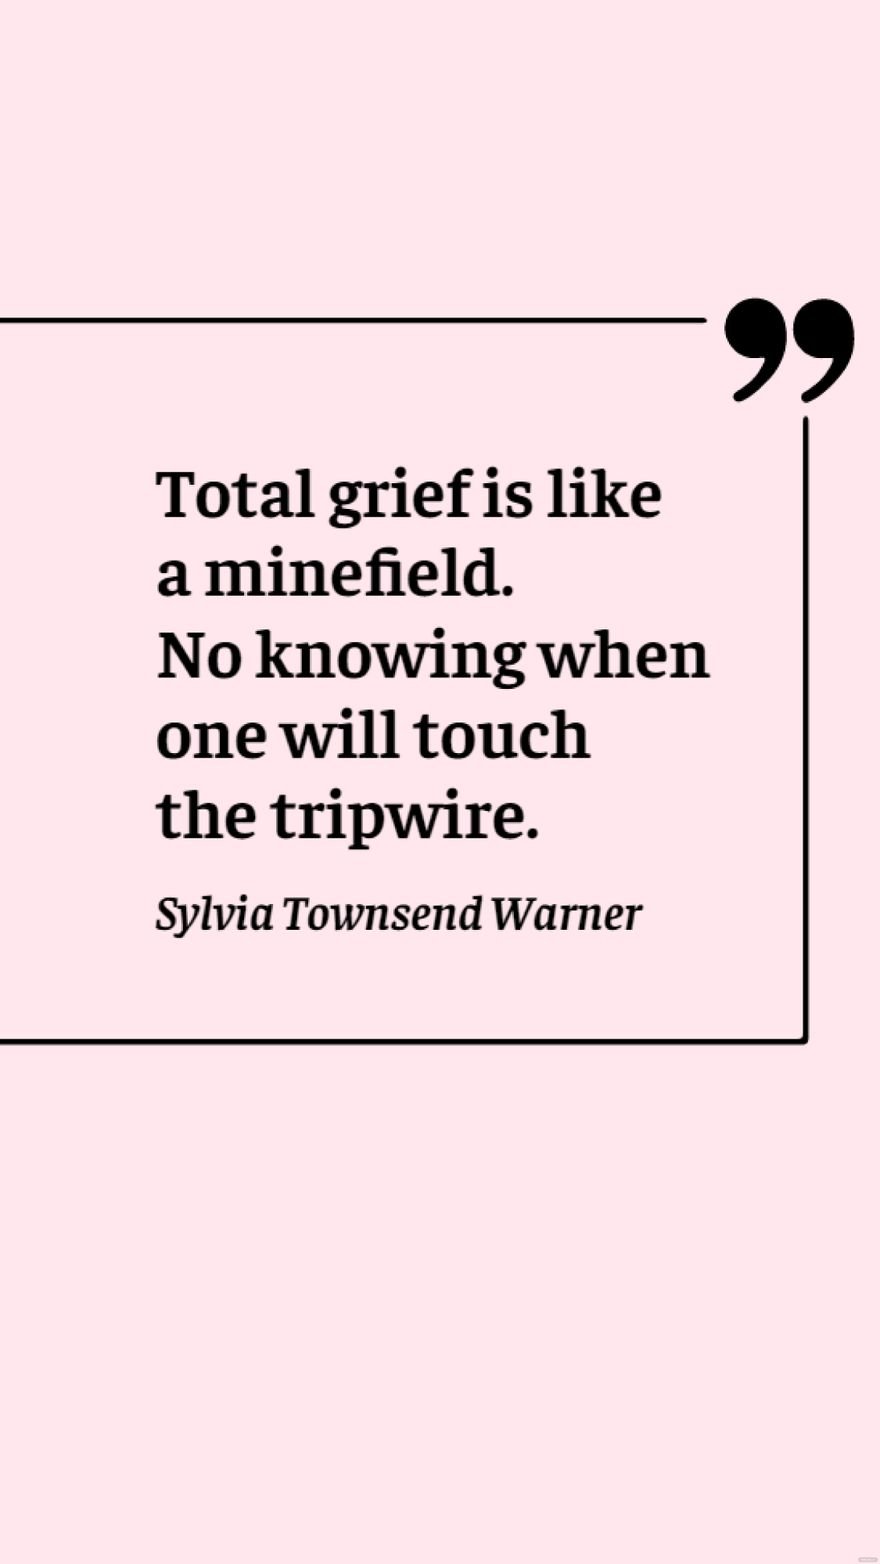 Free Sylvia Townsend Warner - Total grief is like a minefield. No knowing when one will touch the tripwire.